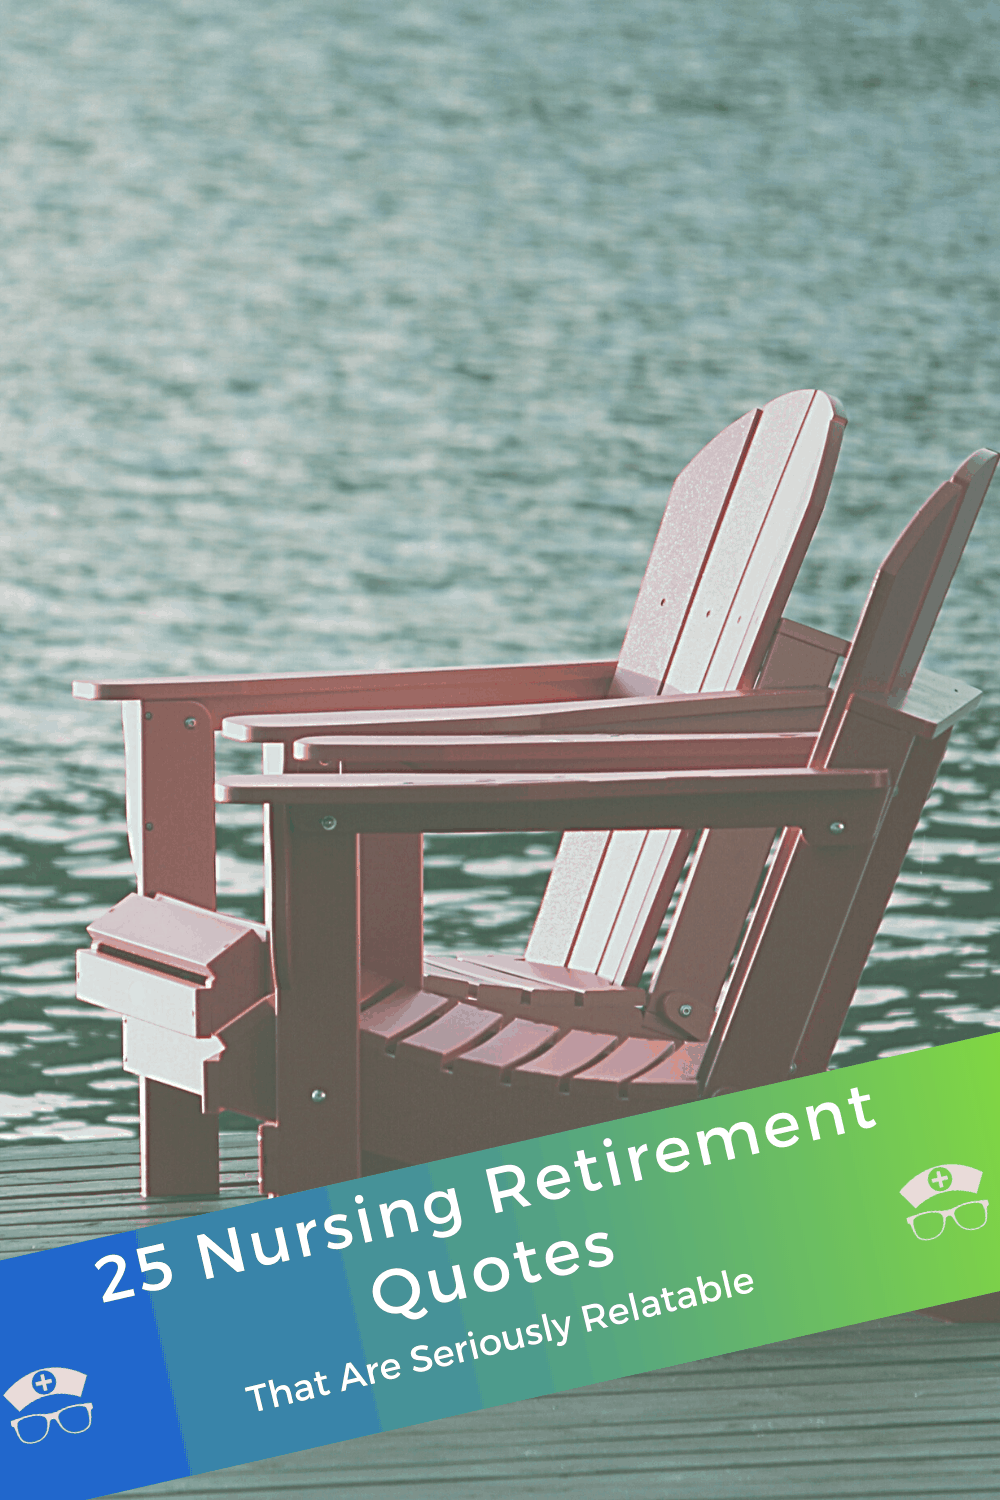 25 Nursing Retirement Quotes That Are Seriously Relatable. Share these nursing retirement quotes and sayings with a nurse that you know is close to retirement - or wish they were! They are so meaningful! #thenerdynurse #nurse #nurses #nursequotes #retirement #retirednurse